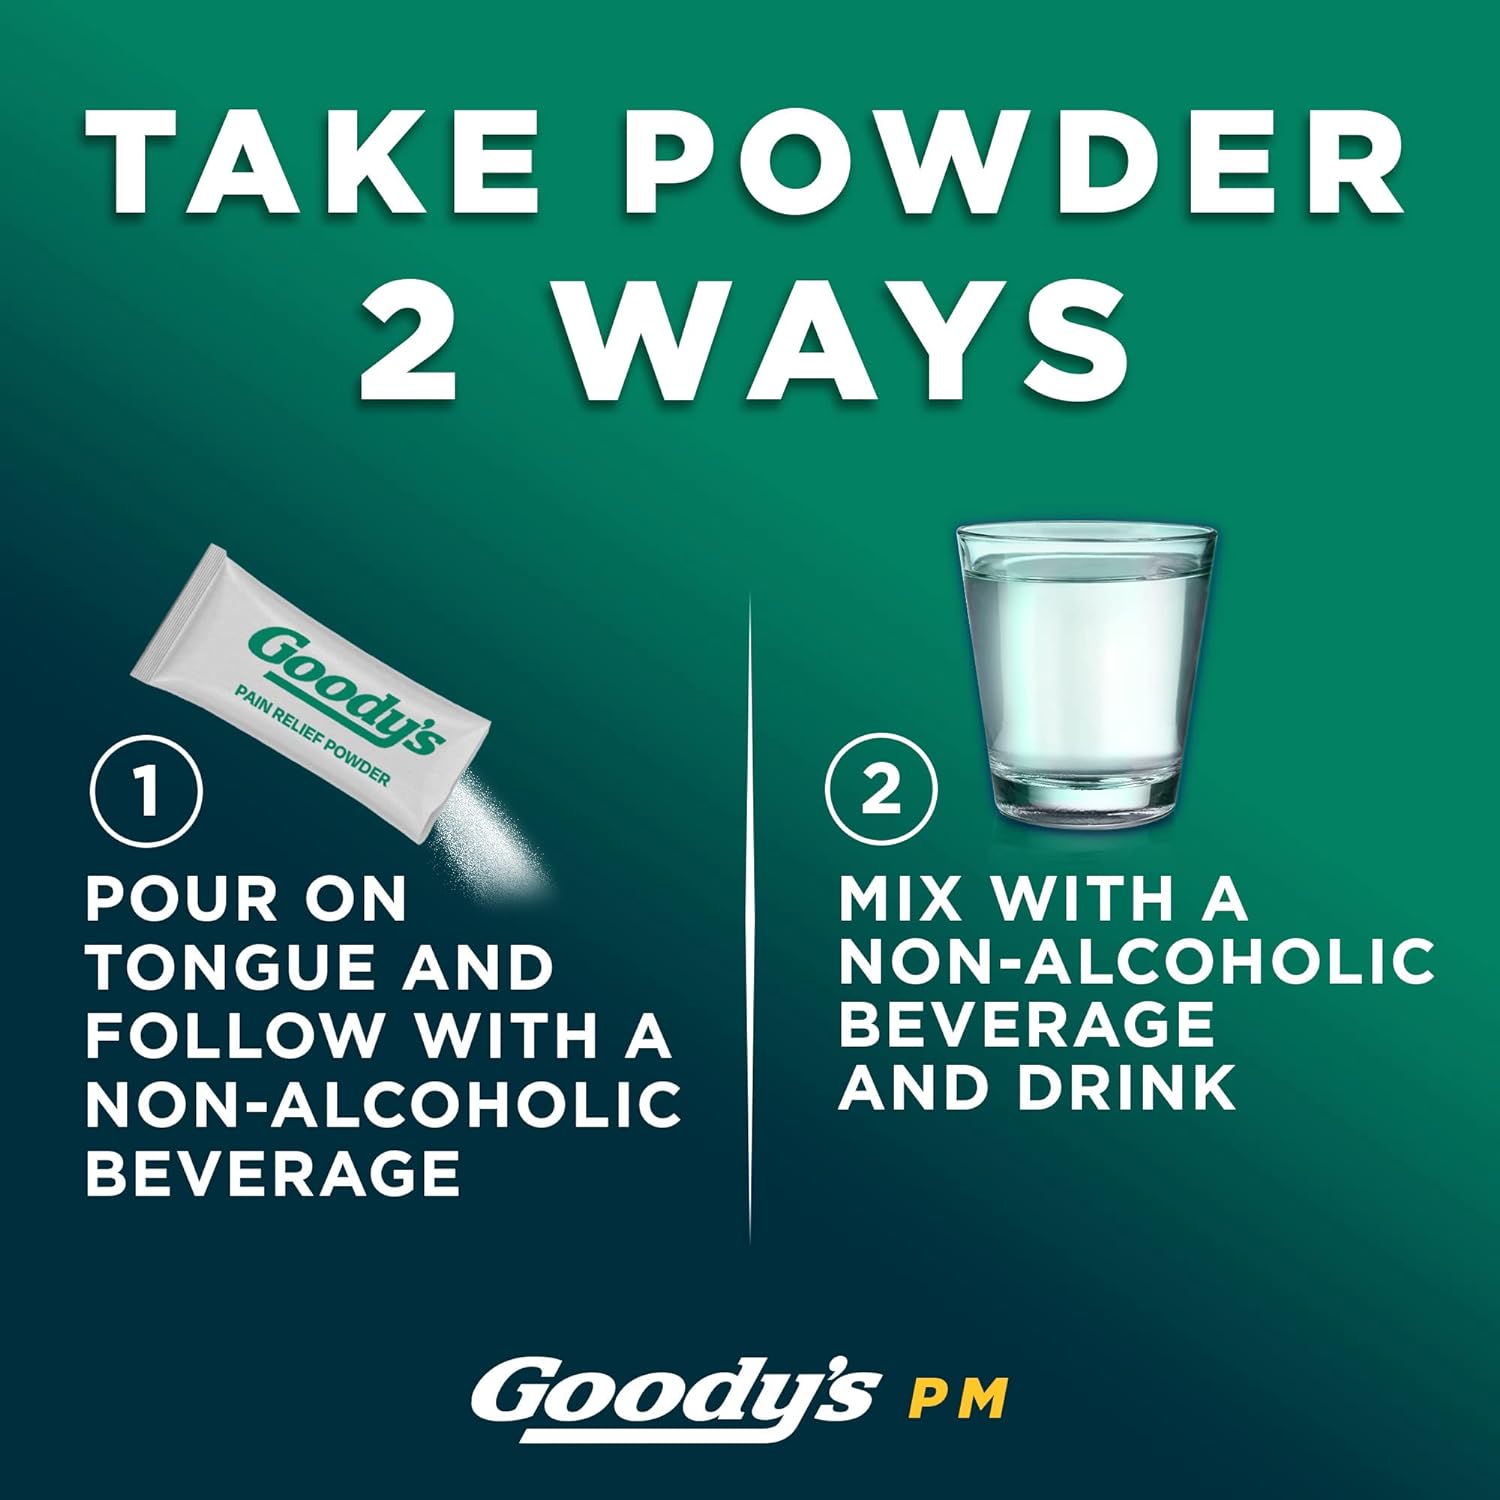 Goody's PM for Pain with Sleeplessness Nighttime Powder, 6 Powder Sticks : Health & Household